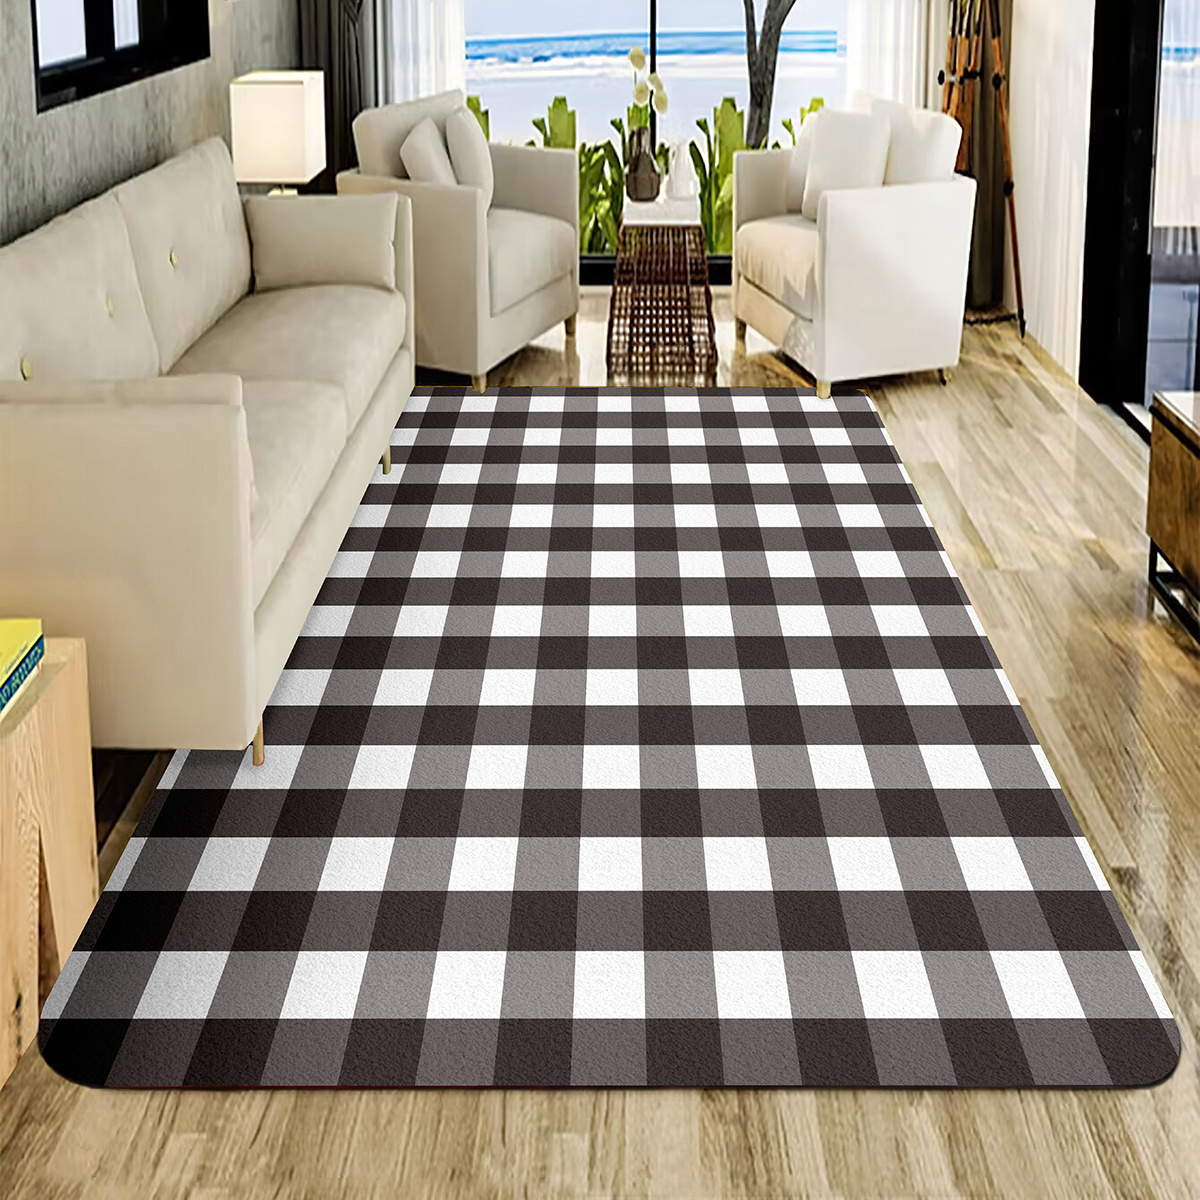 Buffalo Plaid Kitchen Rugs and Mats Non-Slip, Washable, Absorbent Stain  Resistant,Durable and Easy to Clean,Anti Fatigue for Kitchen, Sink, Office